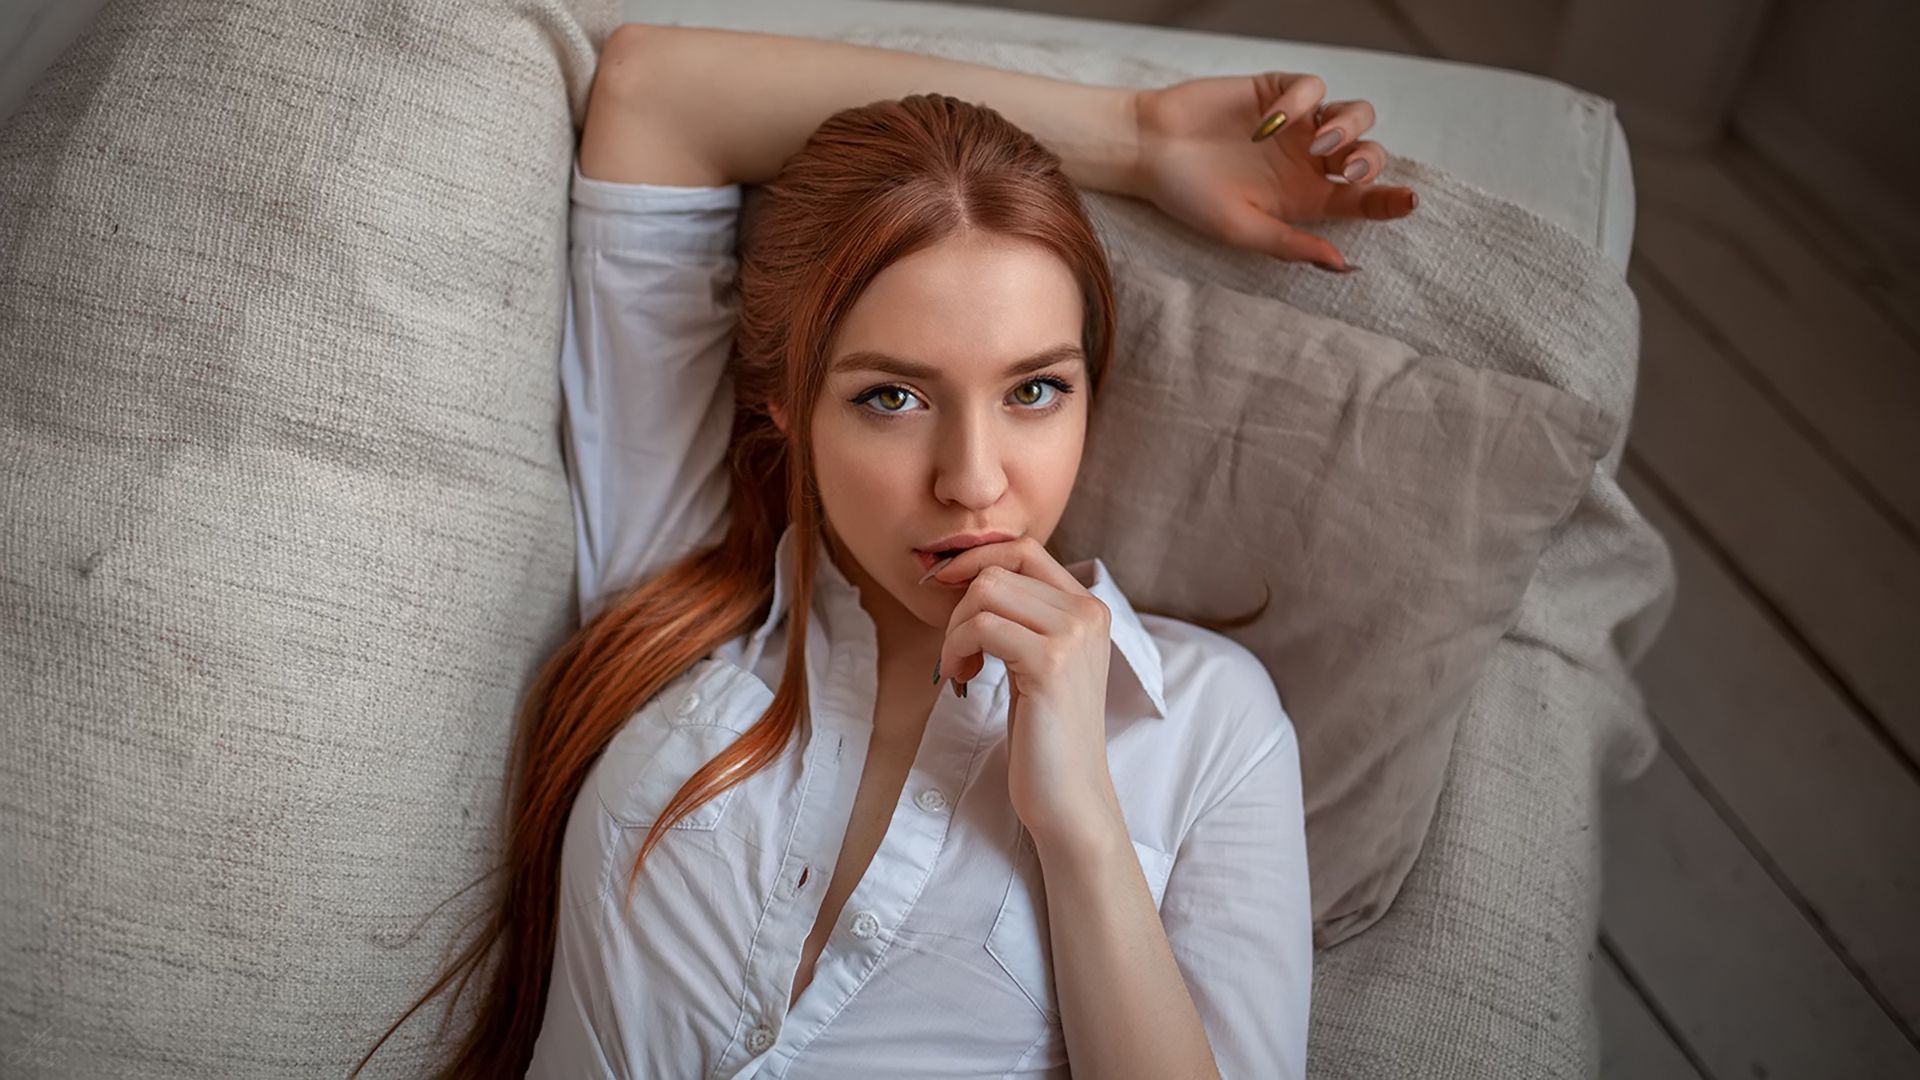 Wallpaper, women, face, portrait, redhead, white shirt, finger on lips, painted nails, long hair, couch, top view, looking at viewer 1920x1080